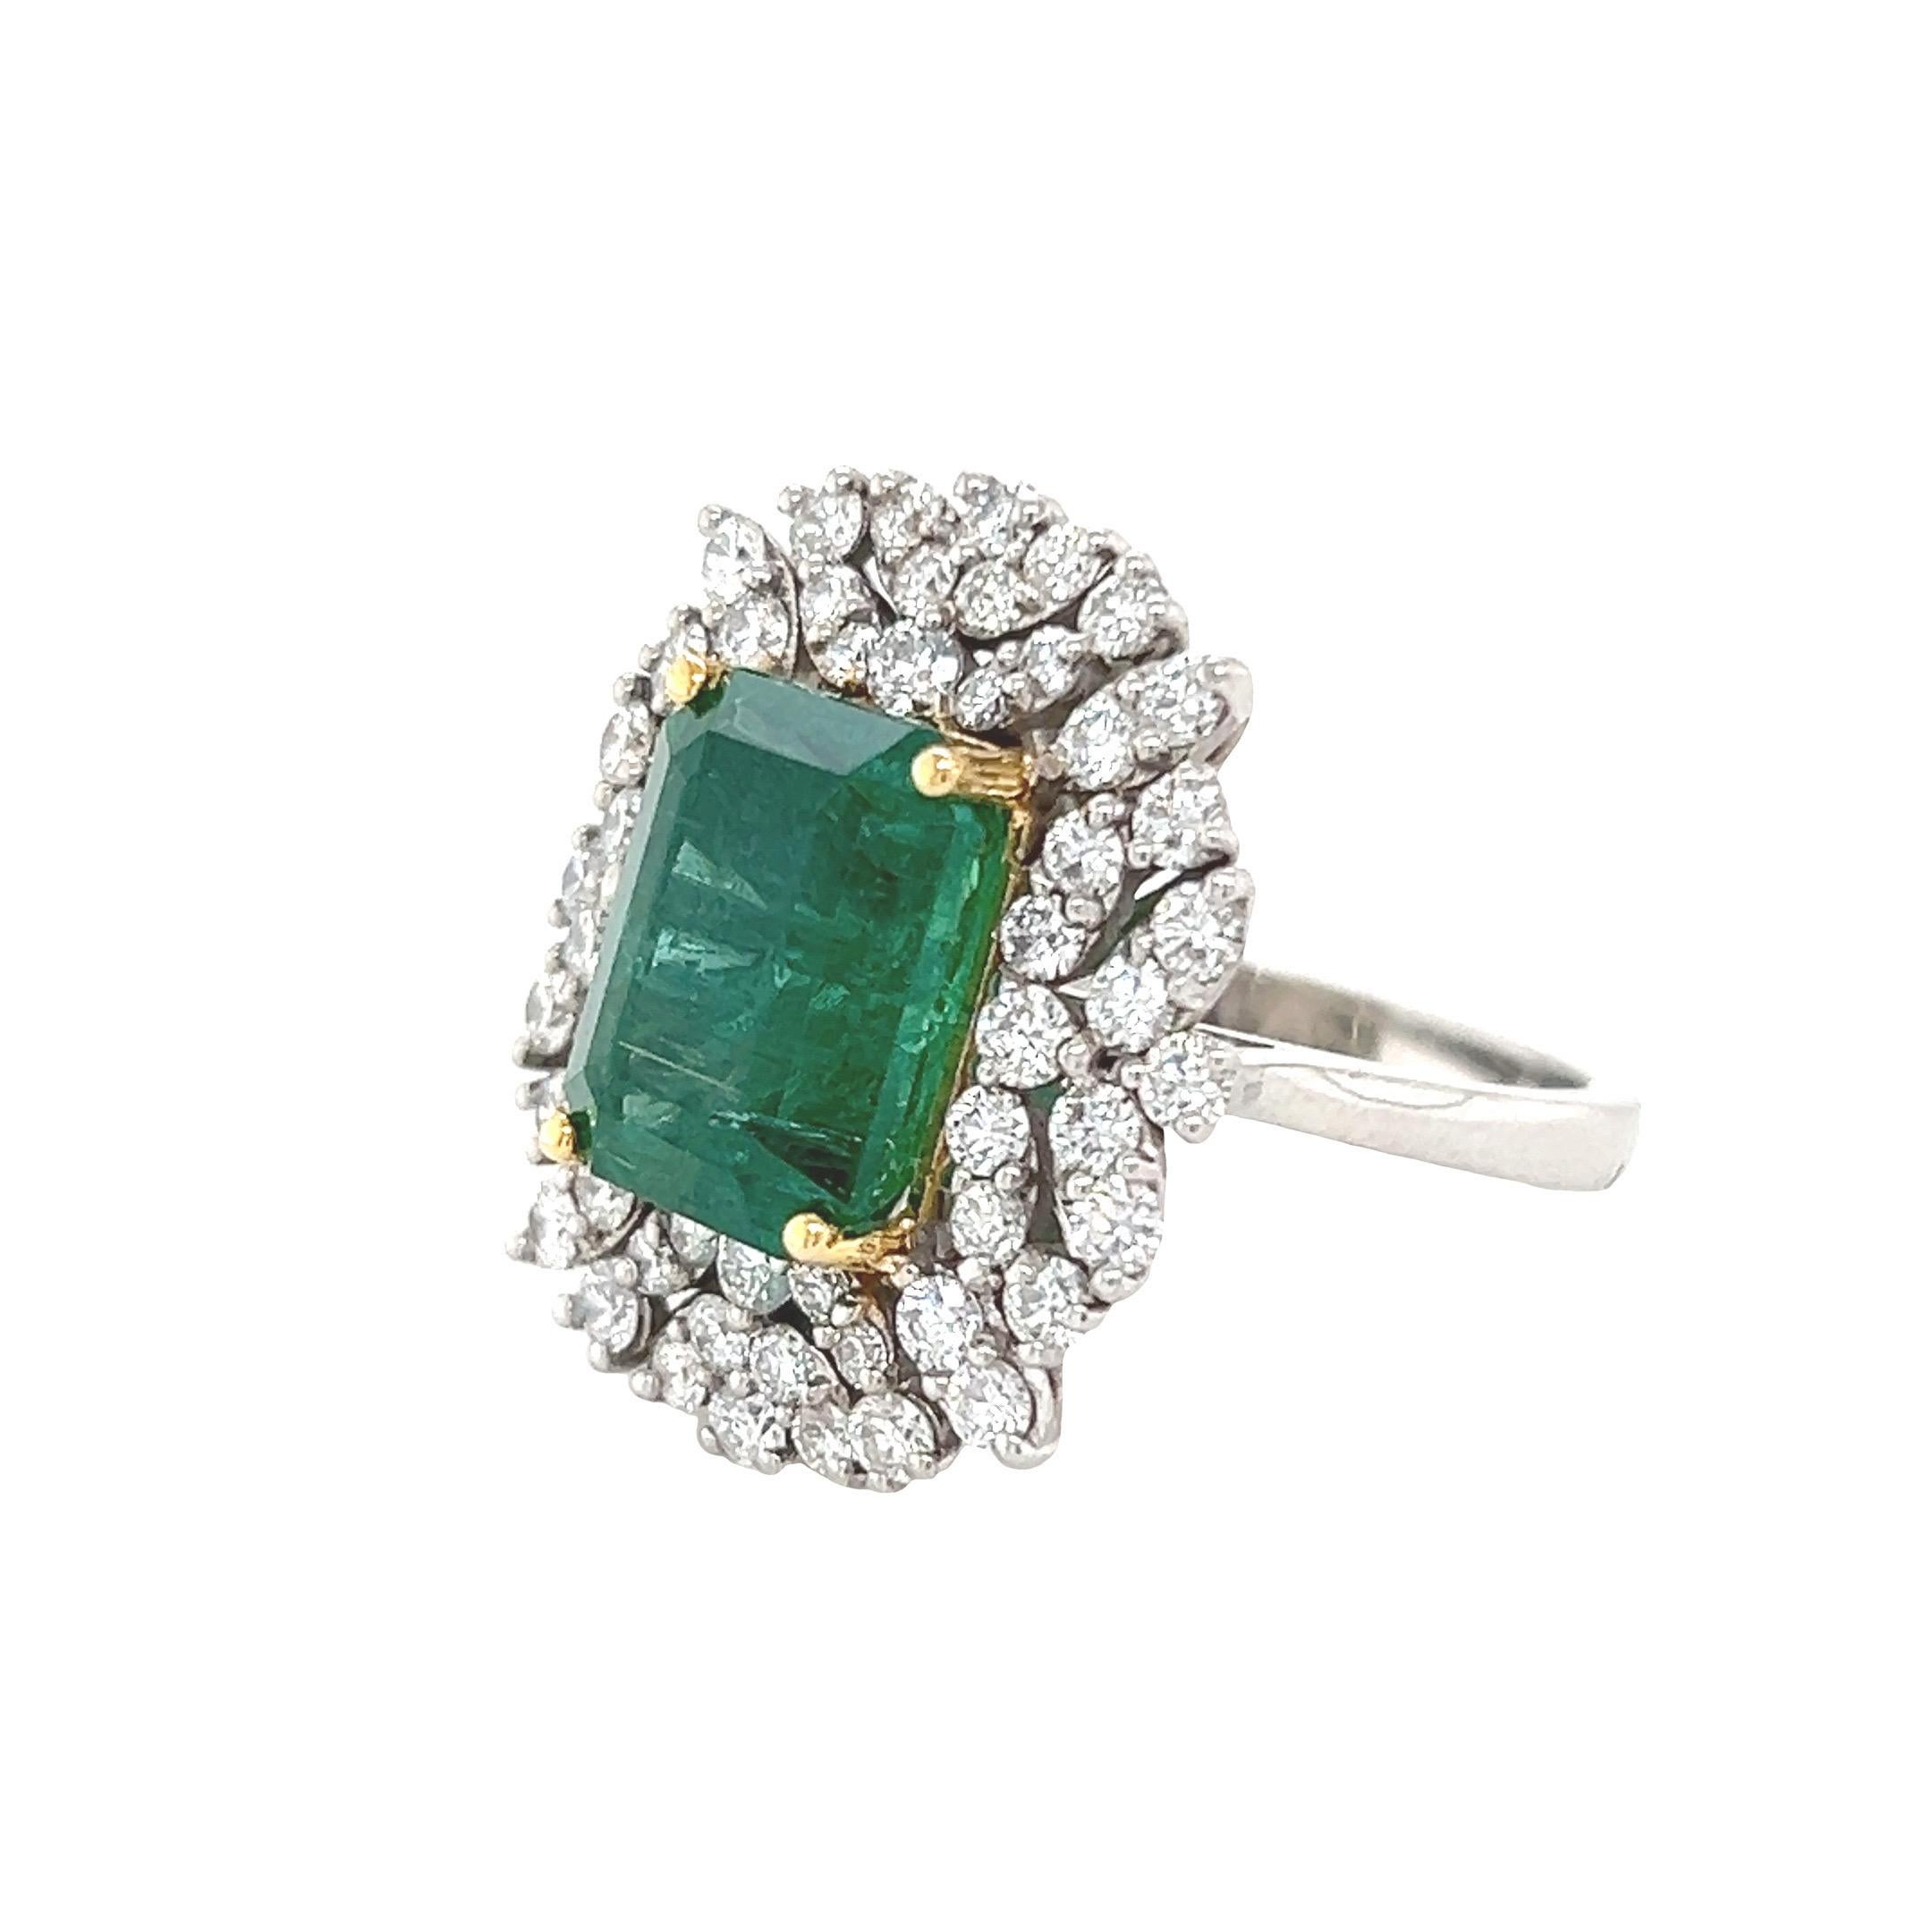 Contemporary 5.66 Carat Zambian Emerald Ring For Sale